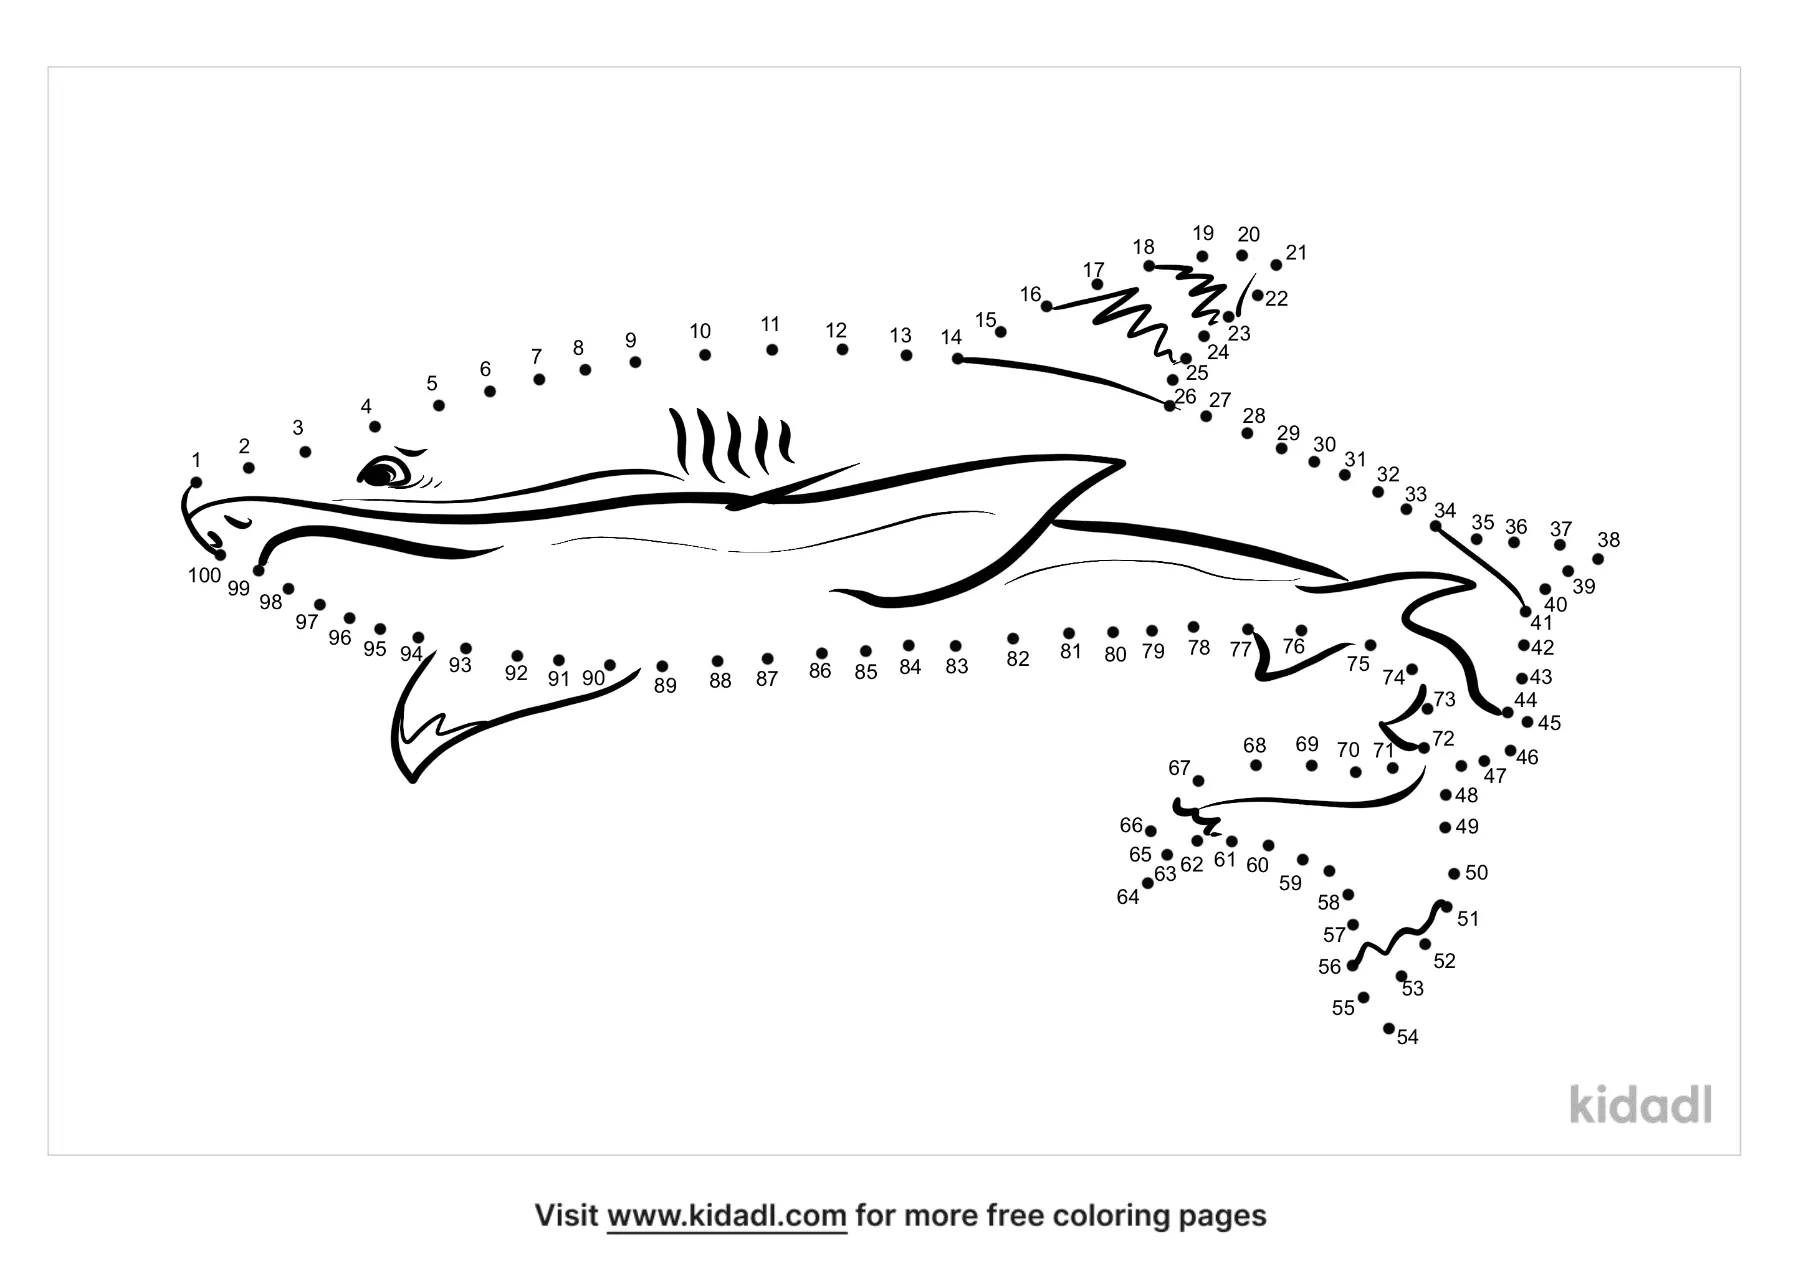 dot to dot coloring pages to 100